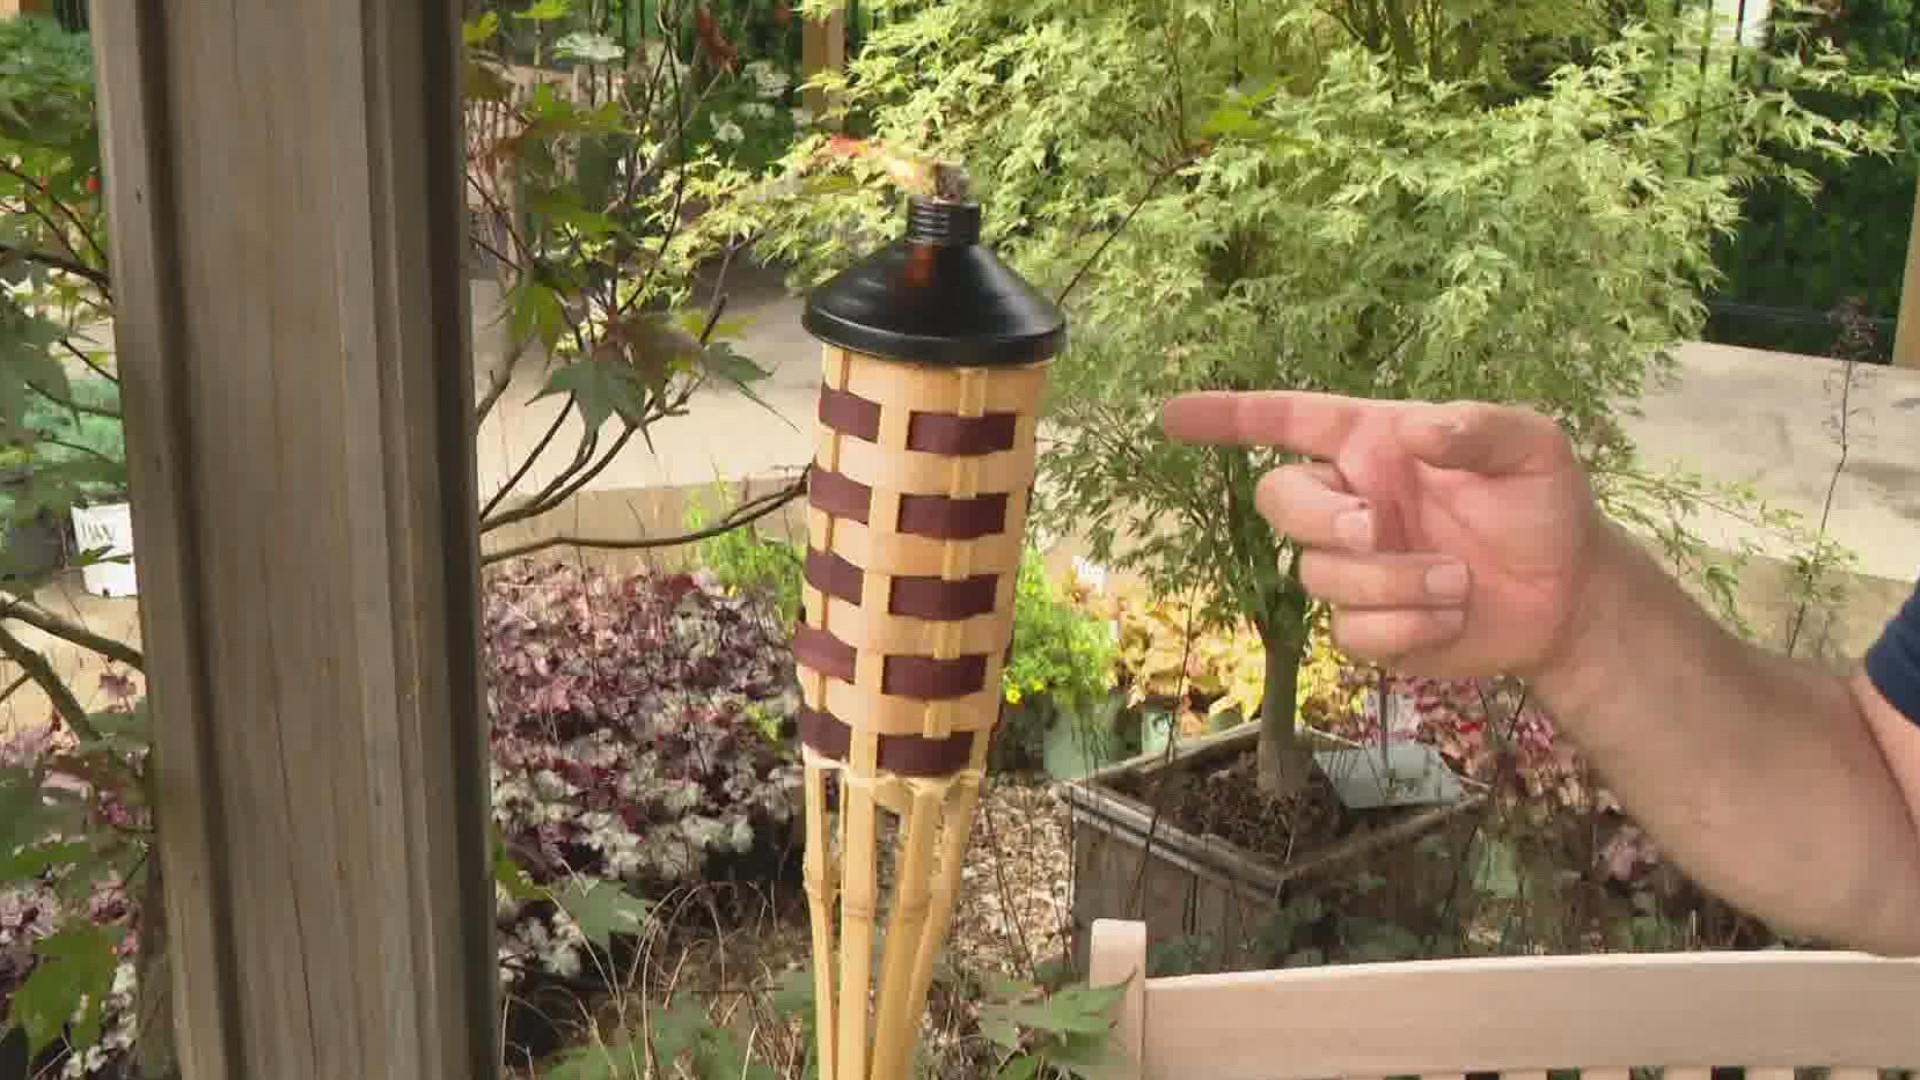 Mosquitoes are going to start showing up after this week's rain, so Pat Sullivan shares some tricks to keep them away from your outdoor areas.